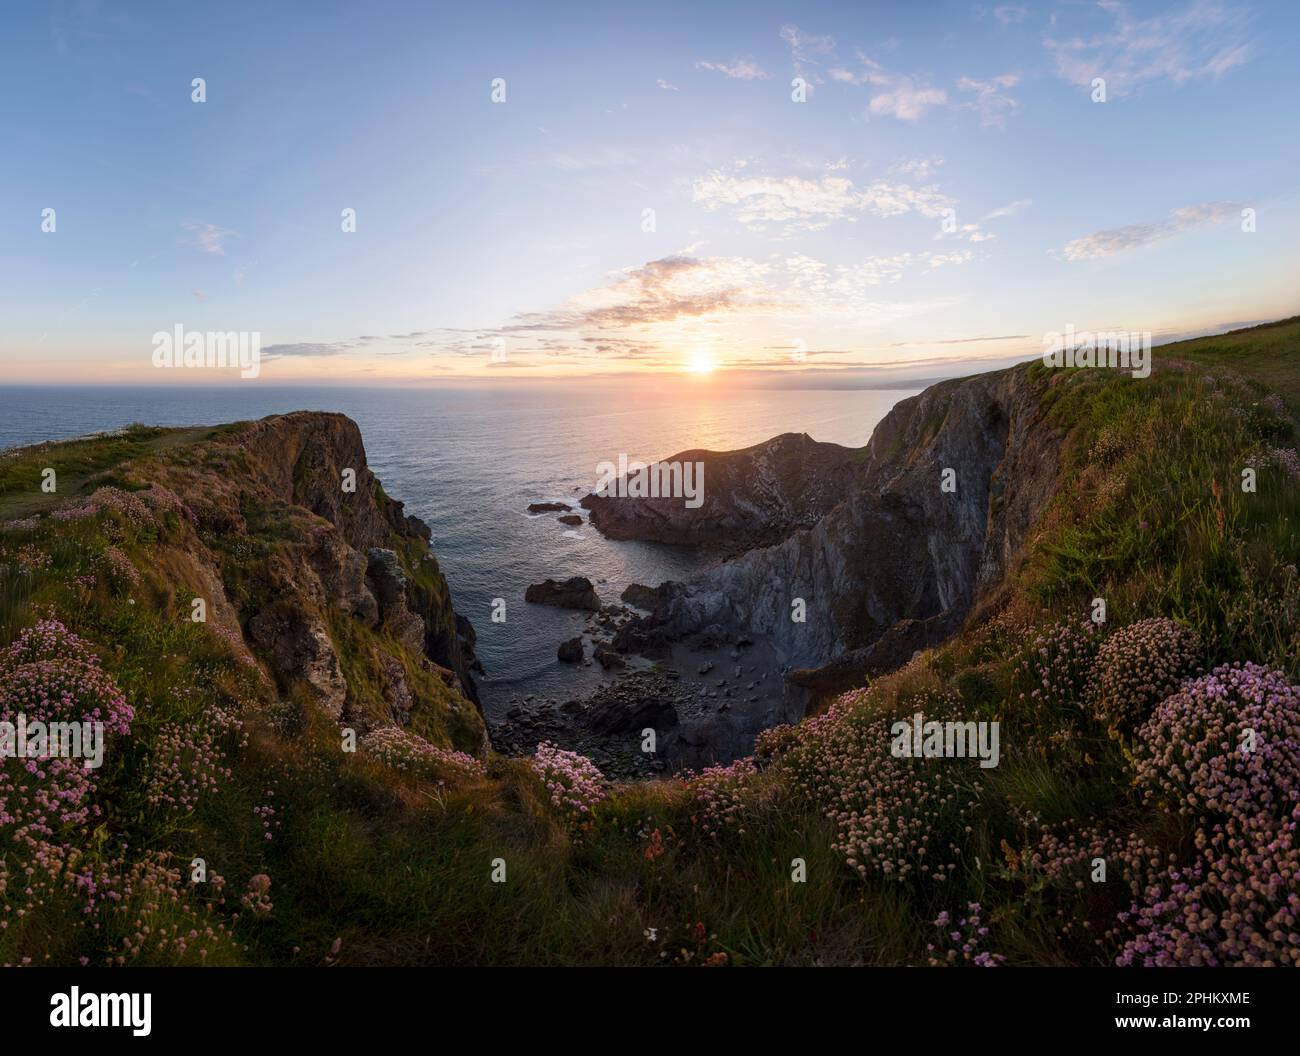 Sunset from Halzephron Cliffs on the Lizard Peninsula in Cornwall. Looking out over the rocks and wild flowers to the sea near Chuch Cove Stock Photo